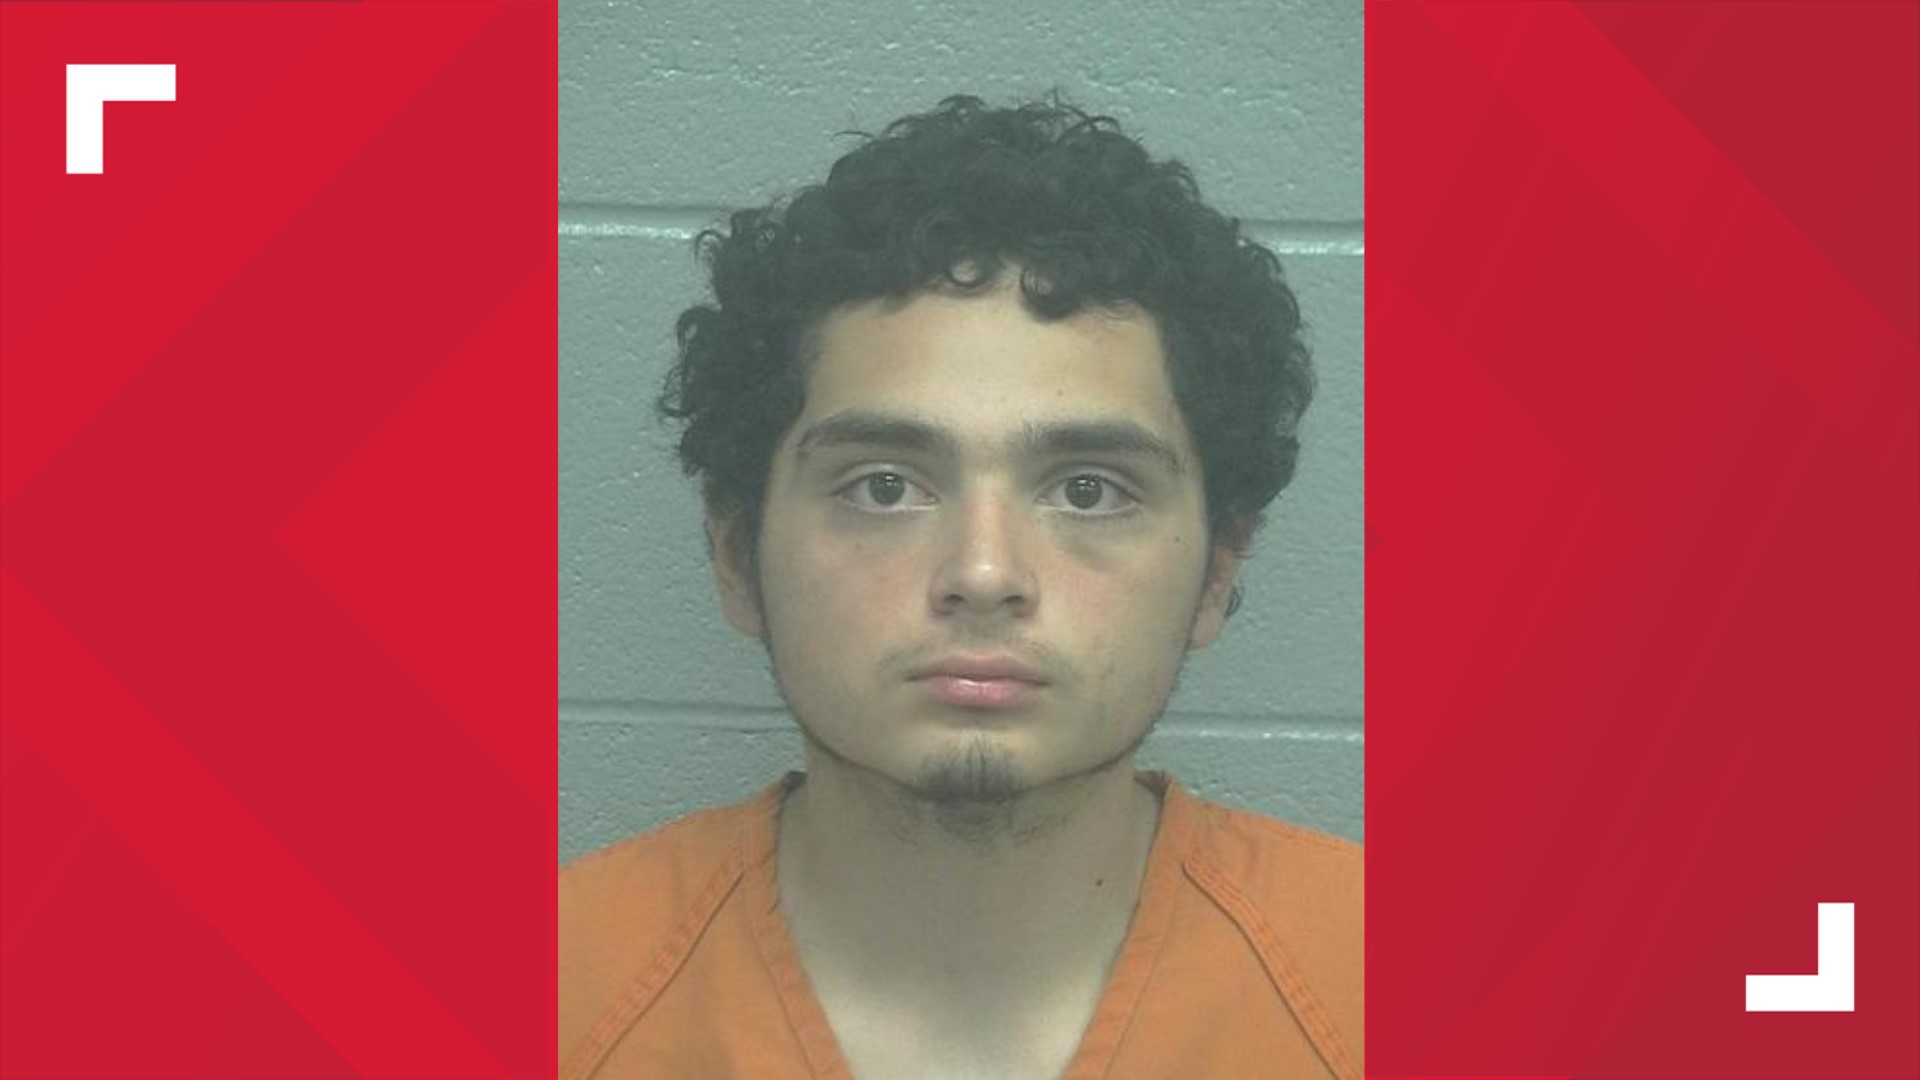 Gomez reportedly attacked the family because he thought they were Chinese and yelled "Get out of America!" at the family.